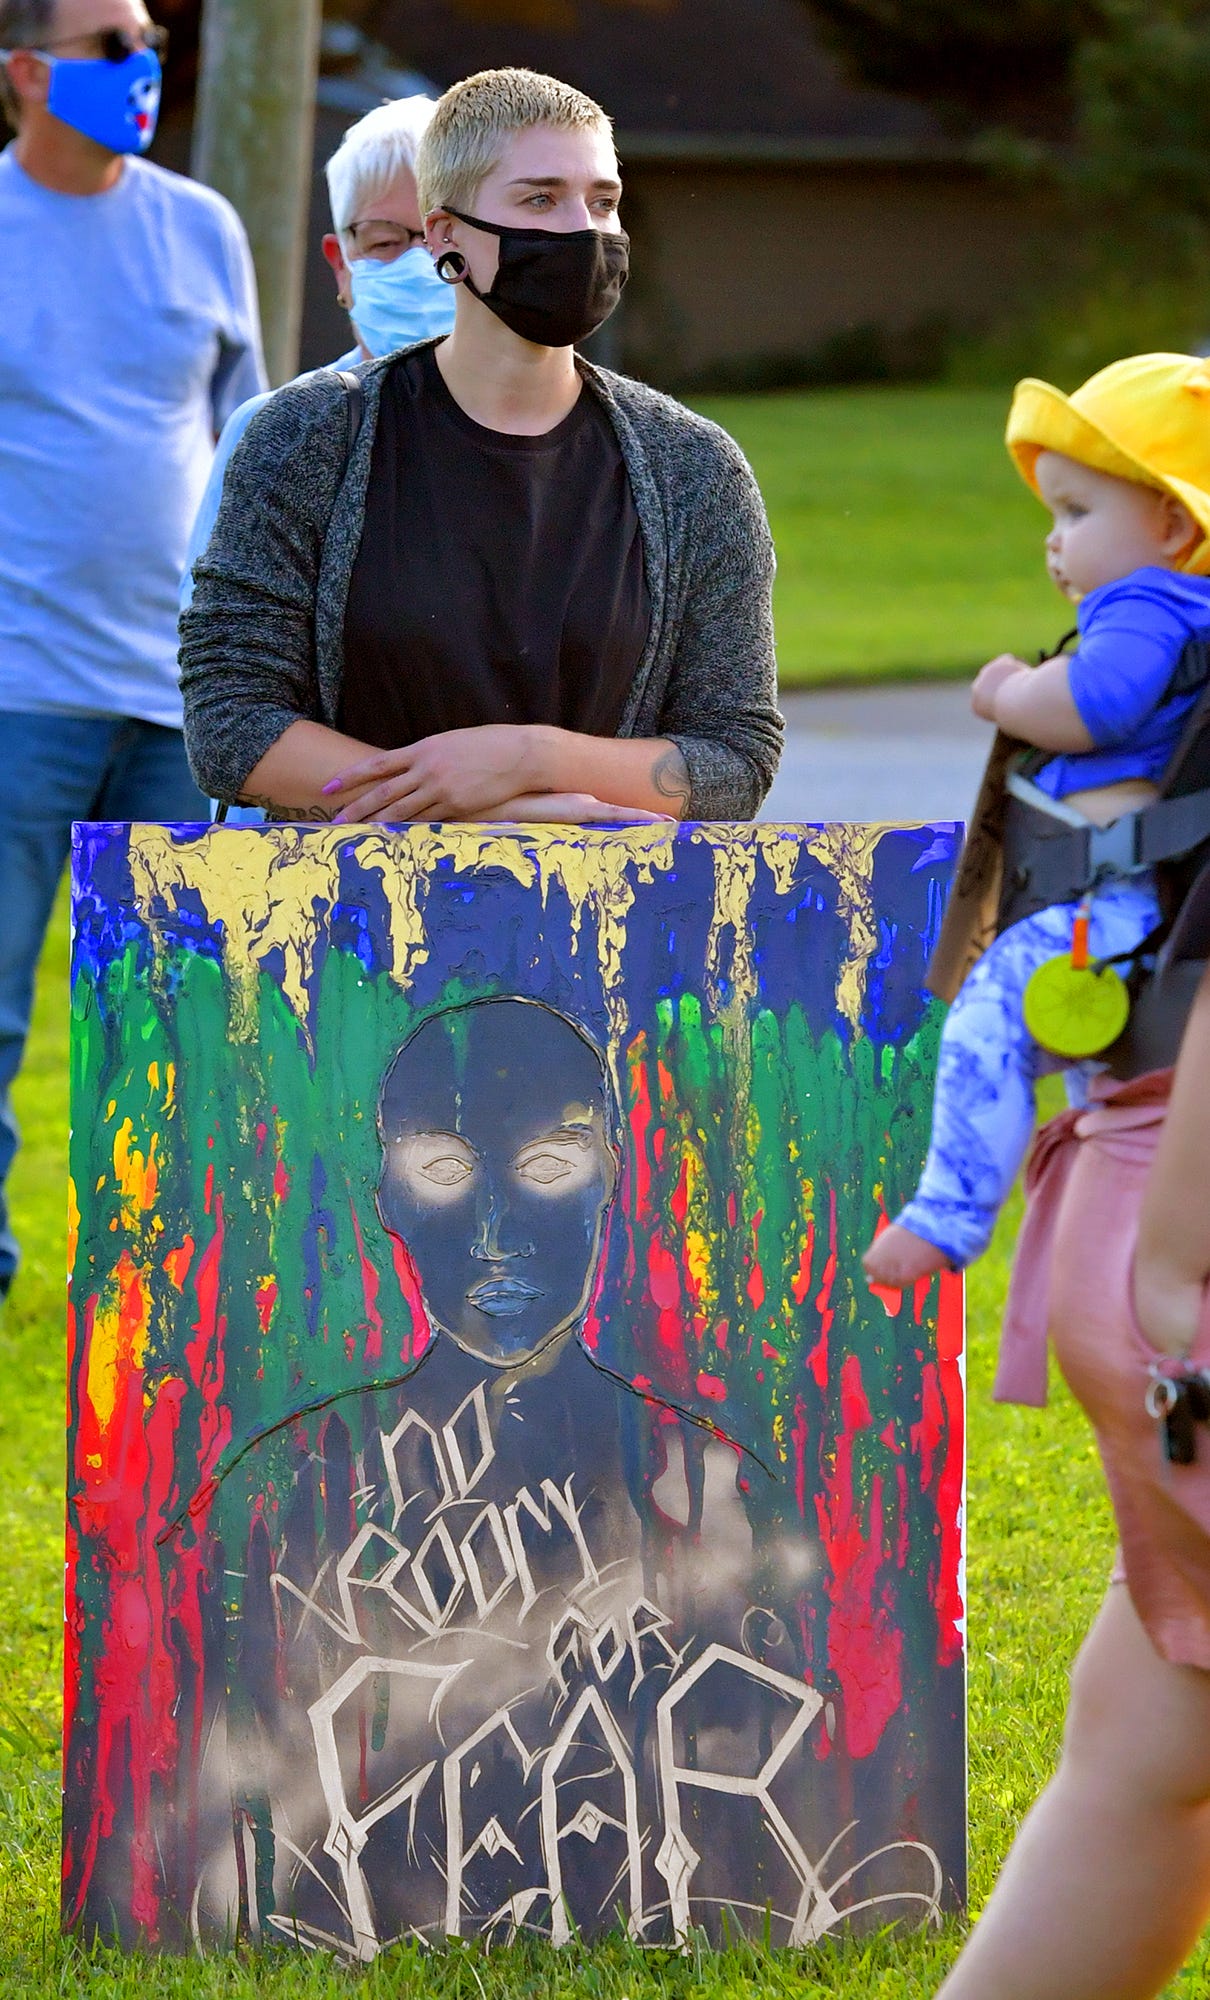 Central York School District art teacher Nicole Osborne displays an original piece of artwork during a rally outside the Central York School District Administration offices before a school board meeting there Monday, Sept. 20, 2021. The rally was in opposition to a banned resource list instituted by the district, which demonstrators say targets minority authors. District officials added formal discussion of the ban to Monday's agenda. Bill Kalina photo